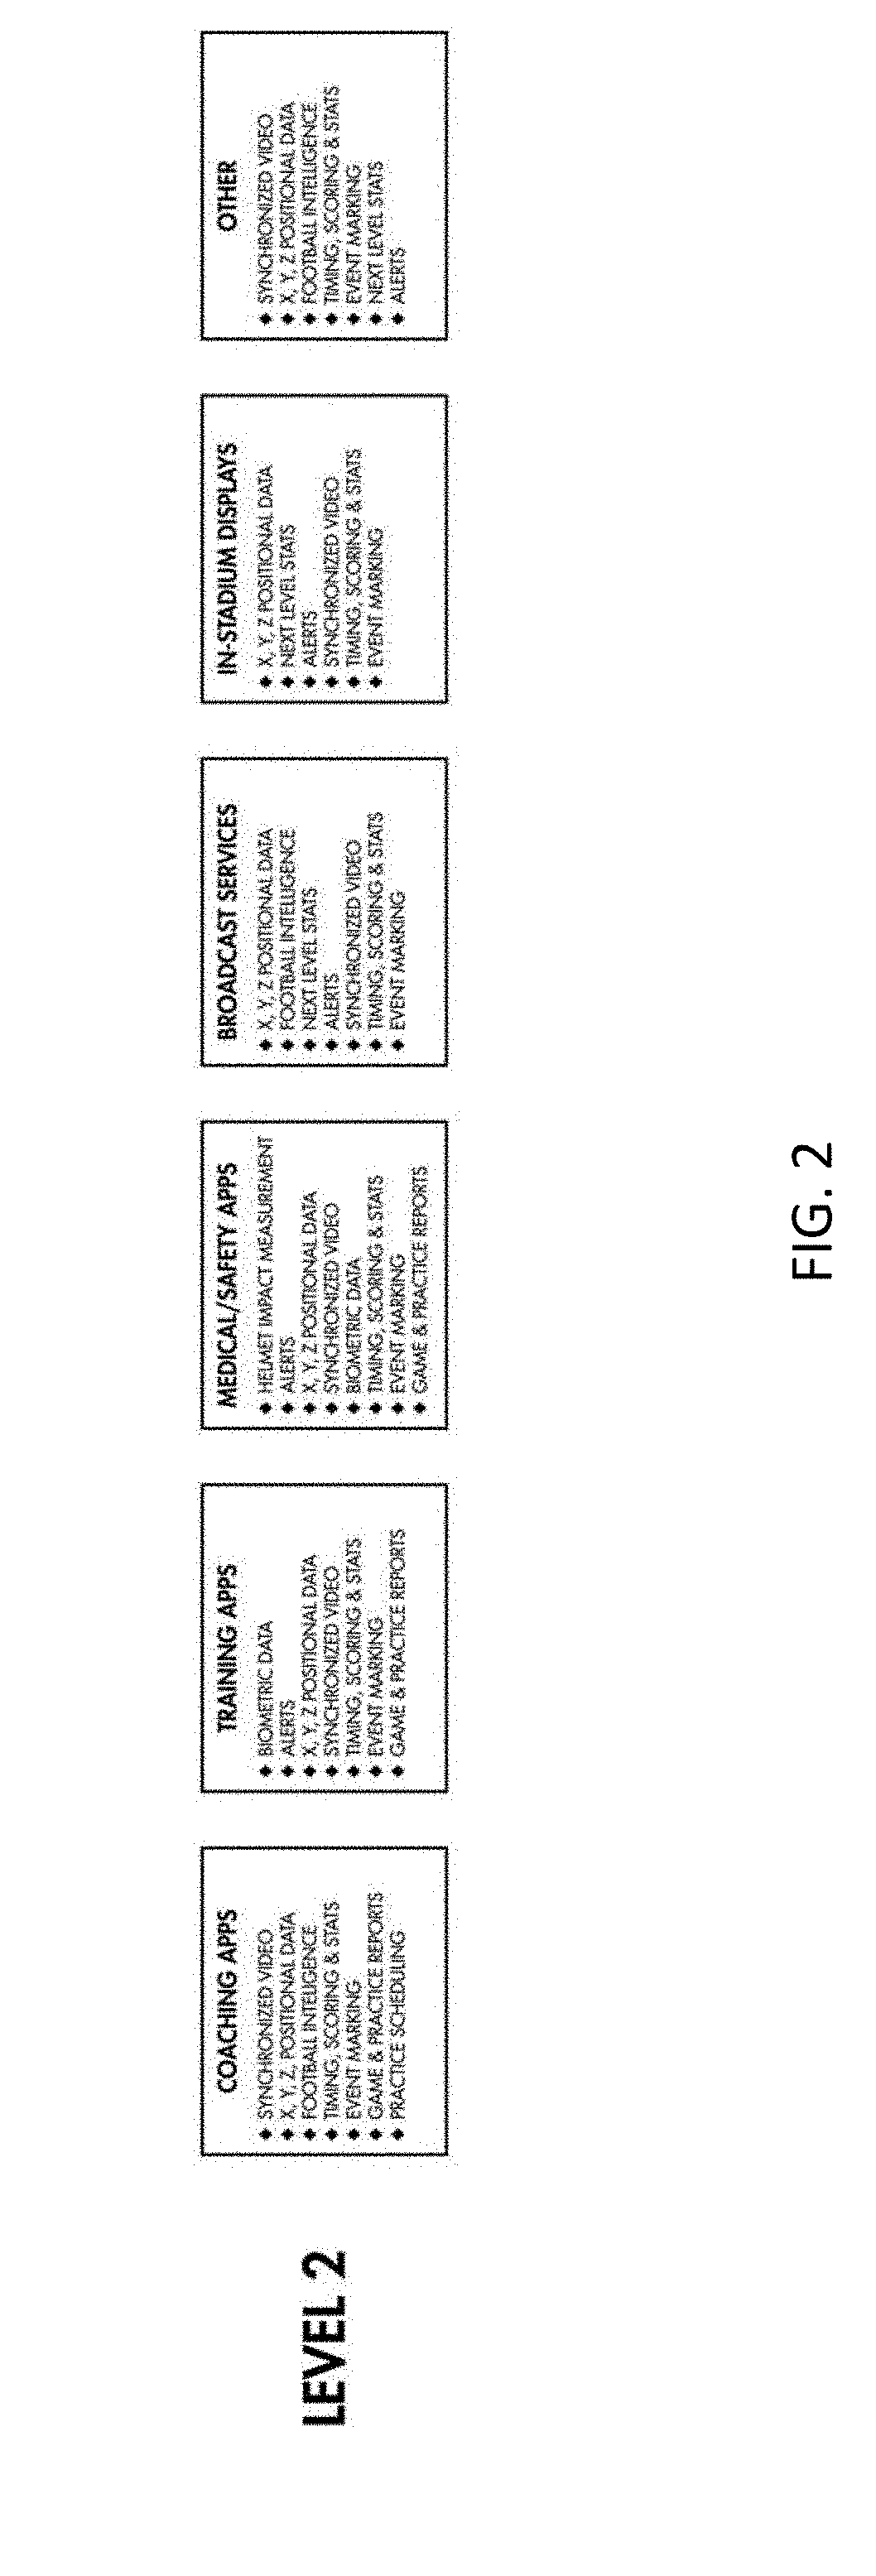 Systems and Methods for Integrated Automated Sports Data Collection and Analytics Platform